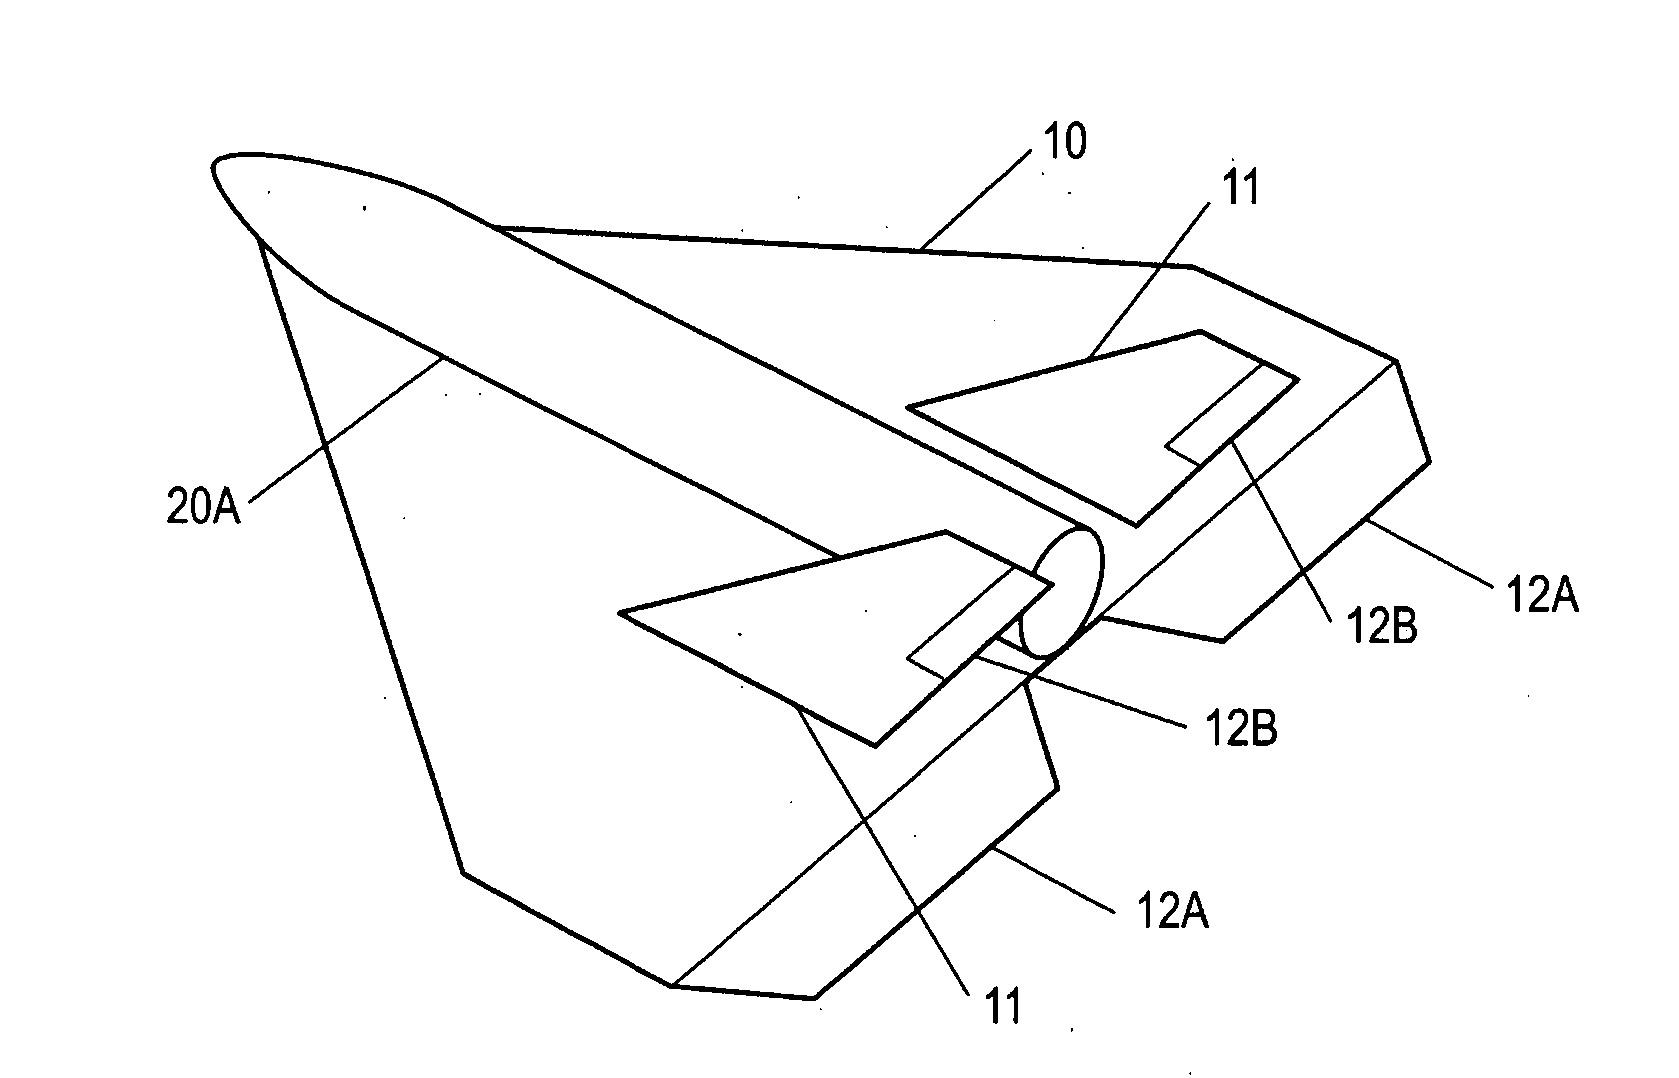 Non-powered, aero-assisted pre-stage for ballistic rockets and aero-assisted flight vehicles